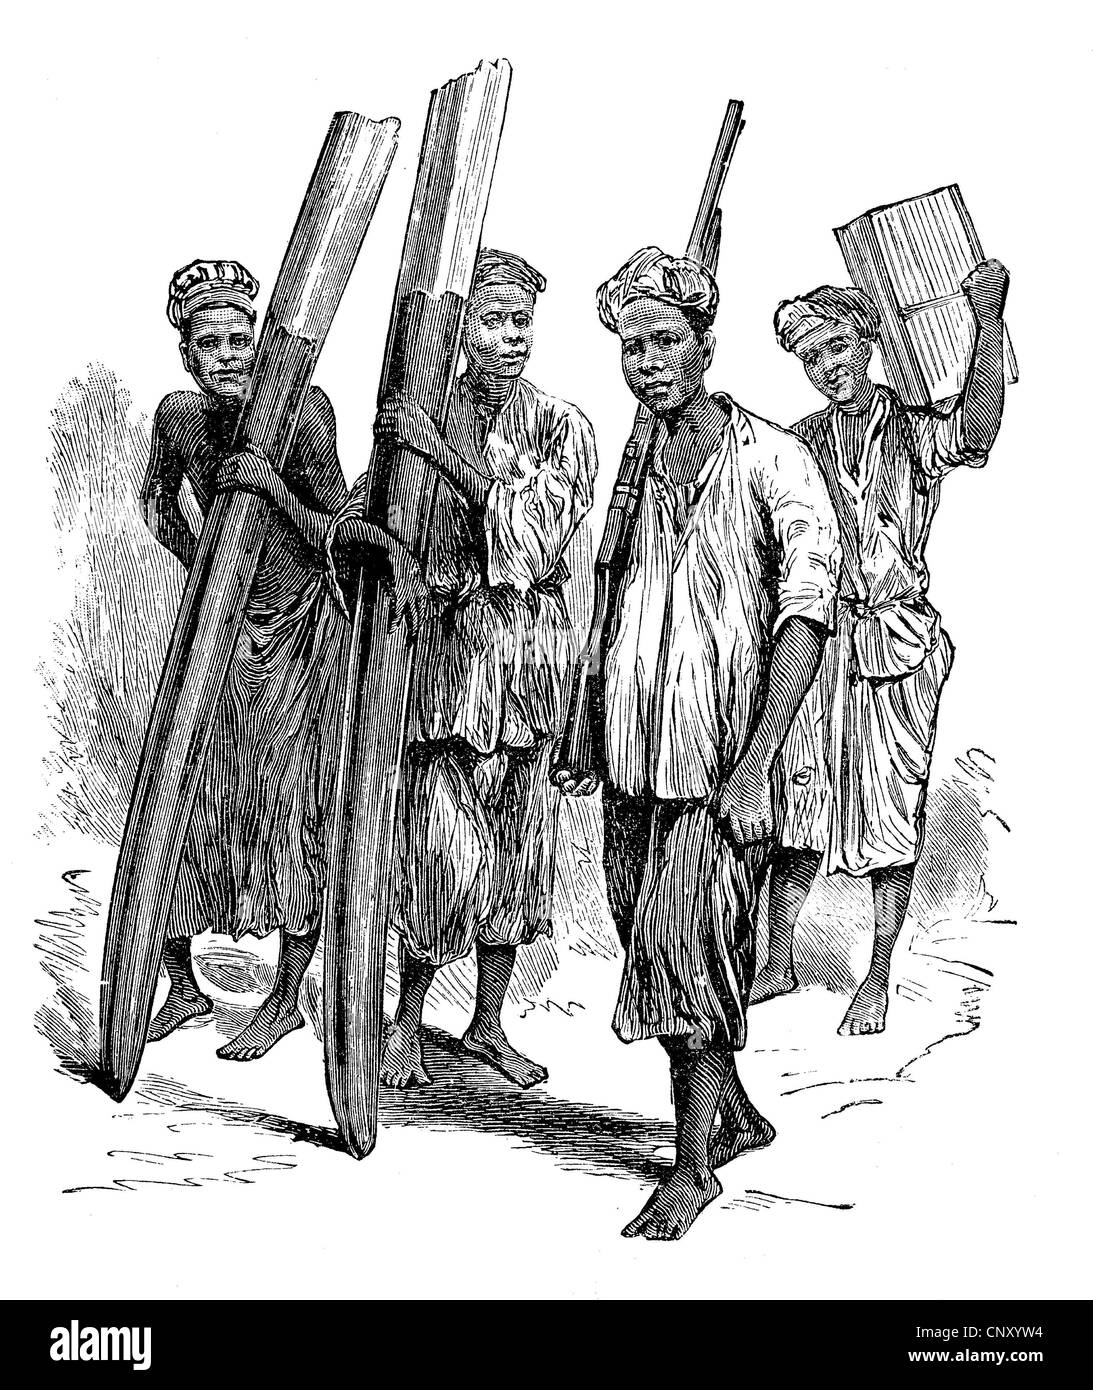 Native burden-bearers carrying ivory in the Congo, historical woodcut, circa 1888 Stock Photo